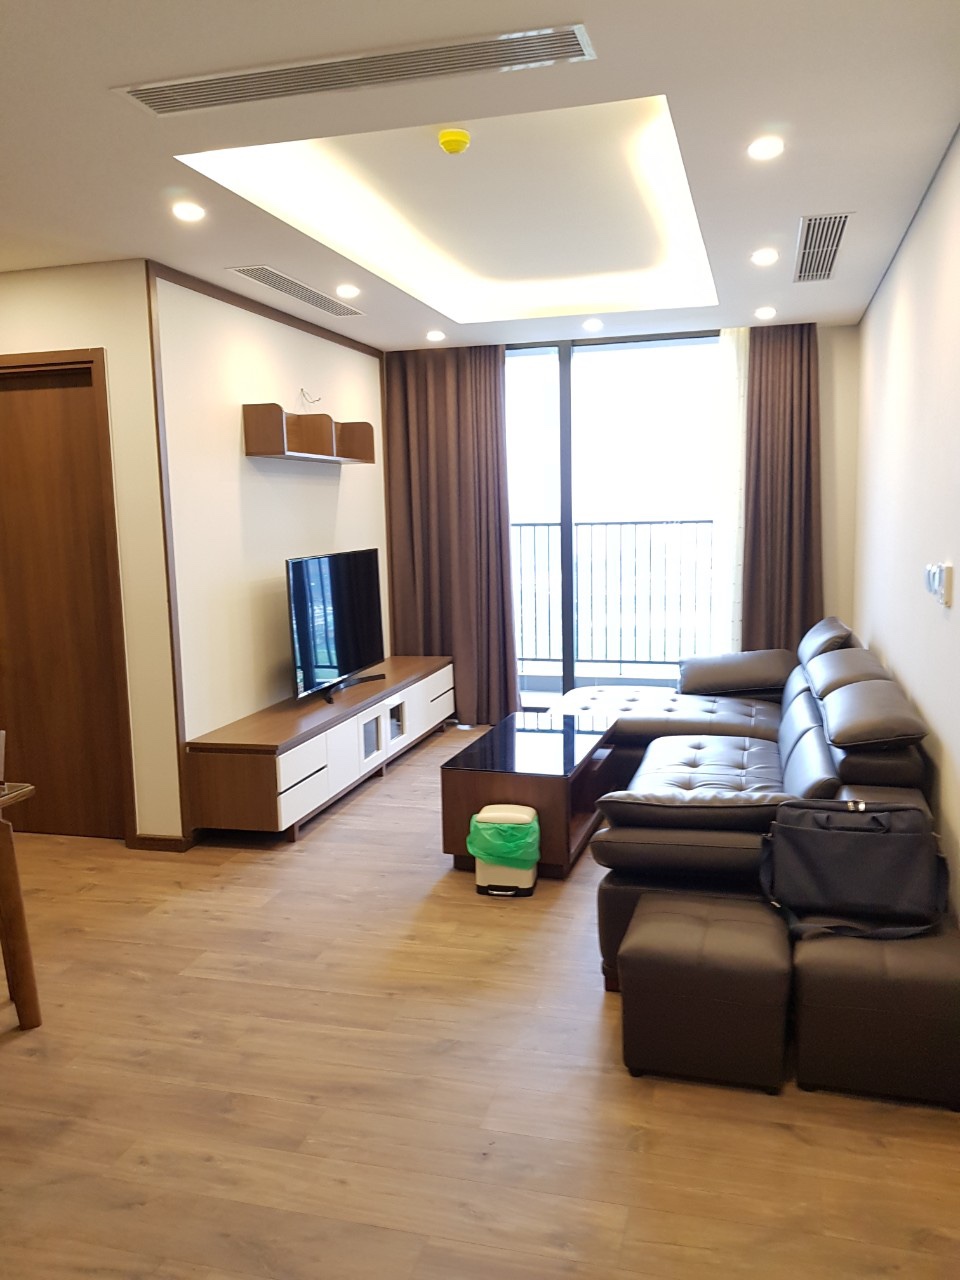 STARLAKE VIEW 2 bedroom apartment for rent in N01T4, Phu My Complex, Diplomatic Corps